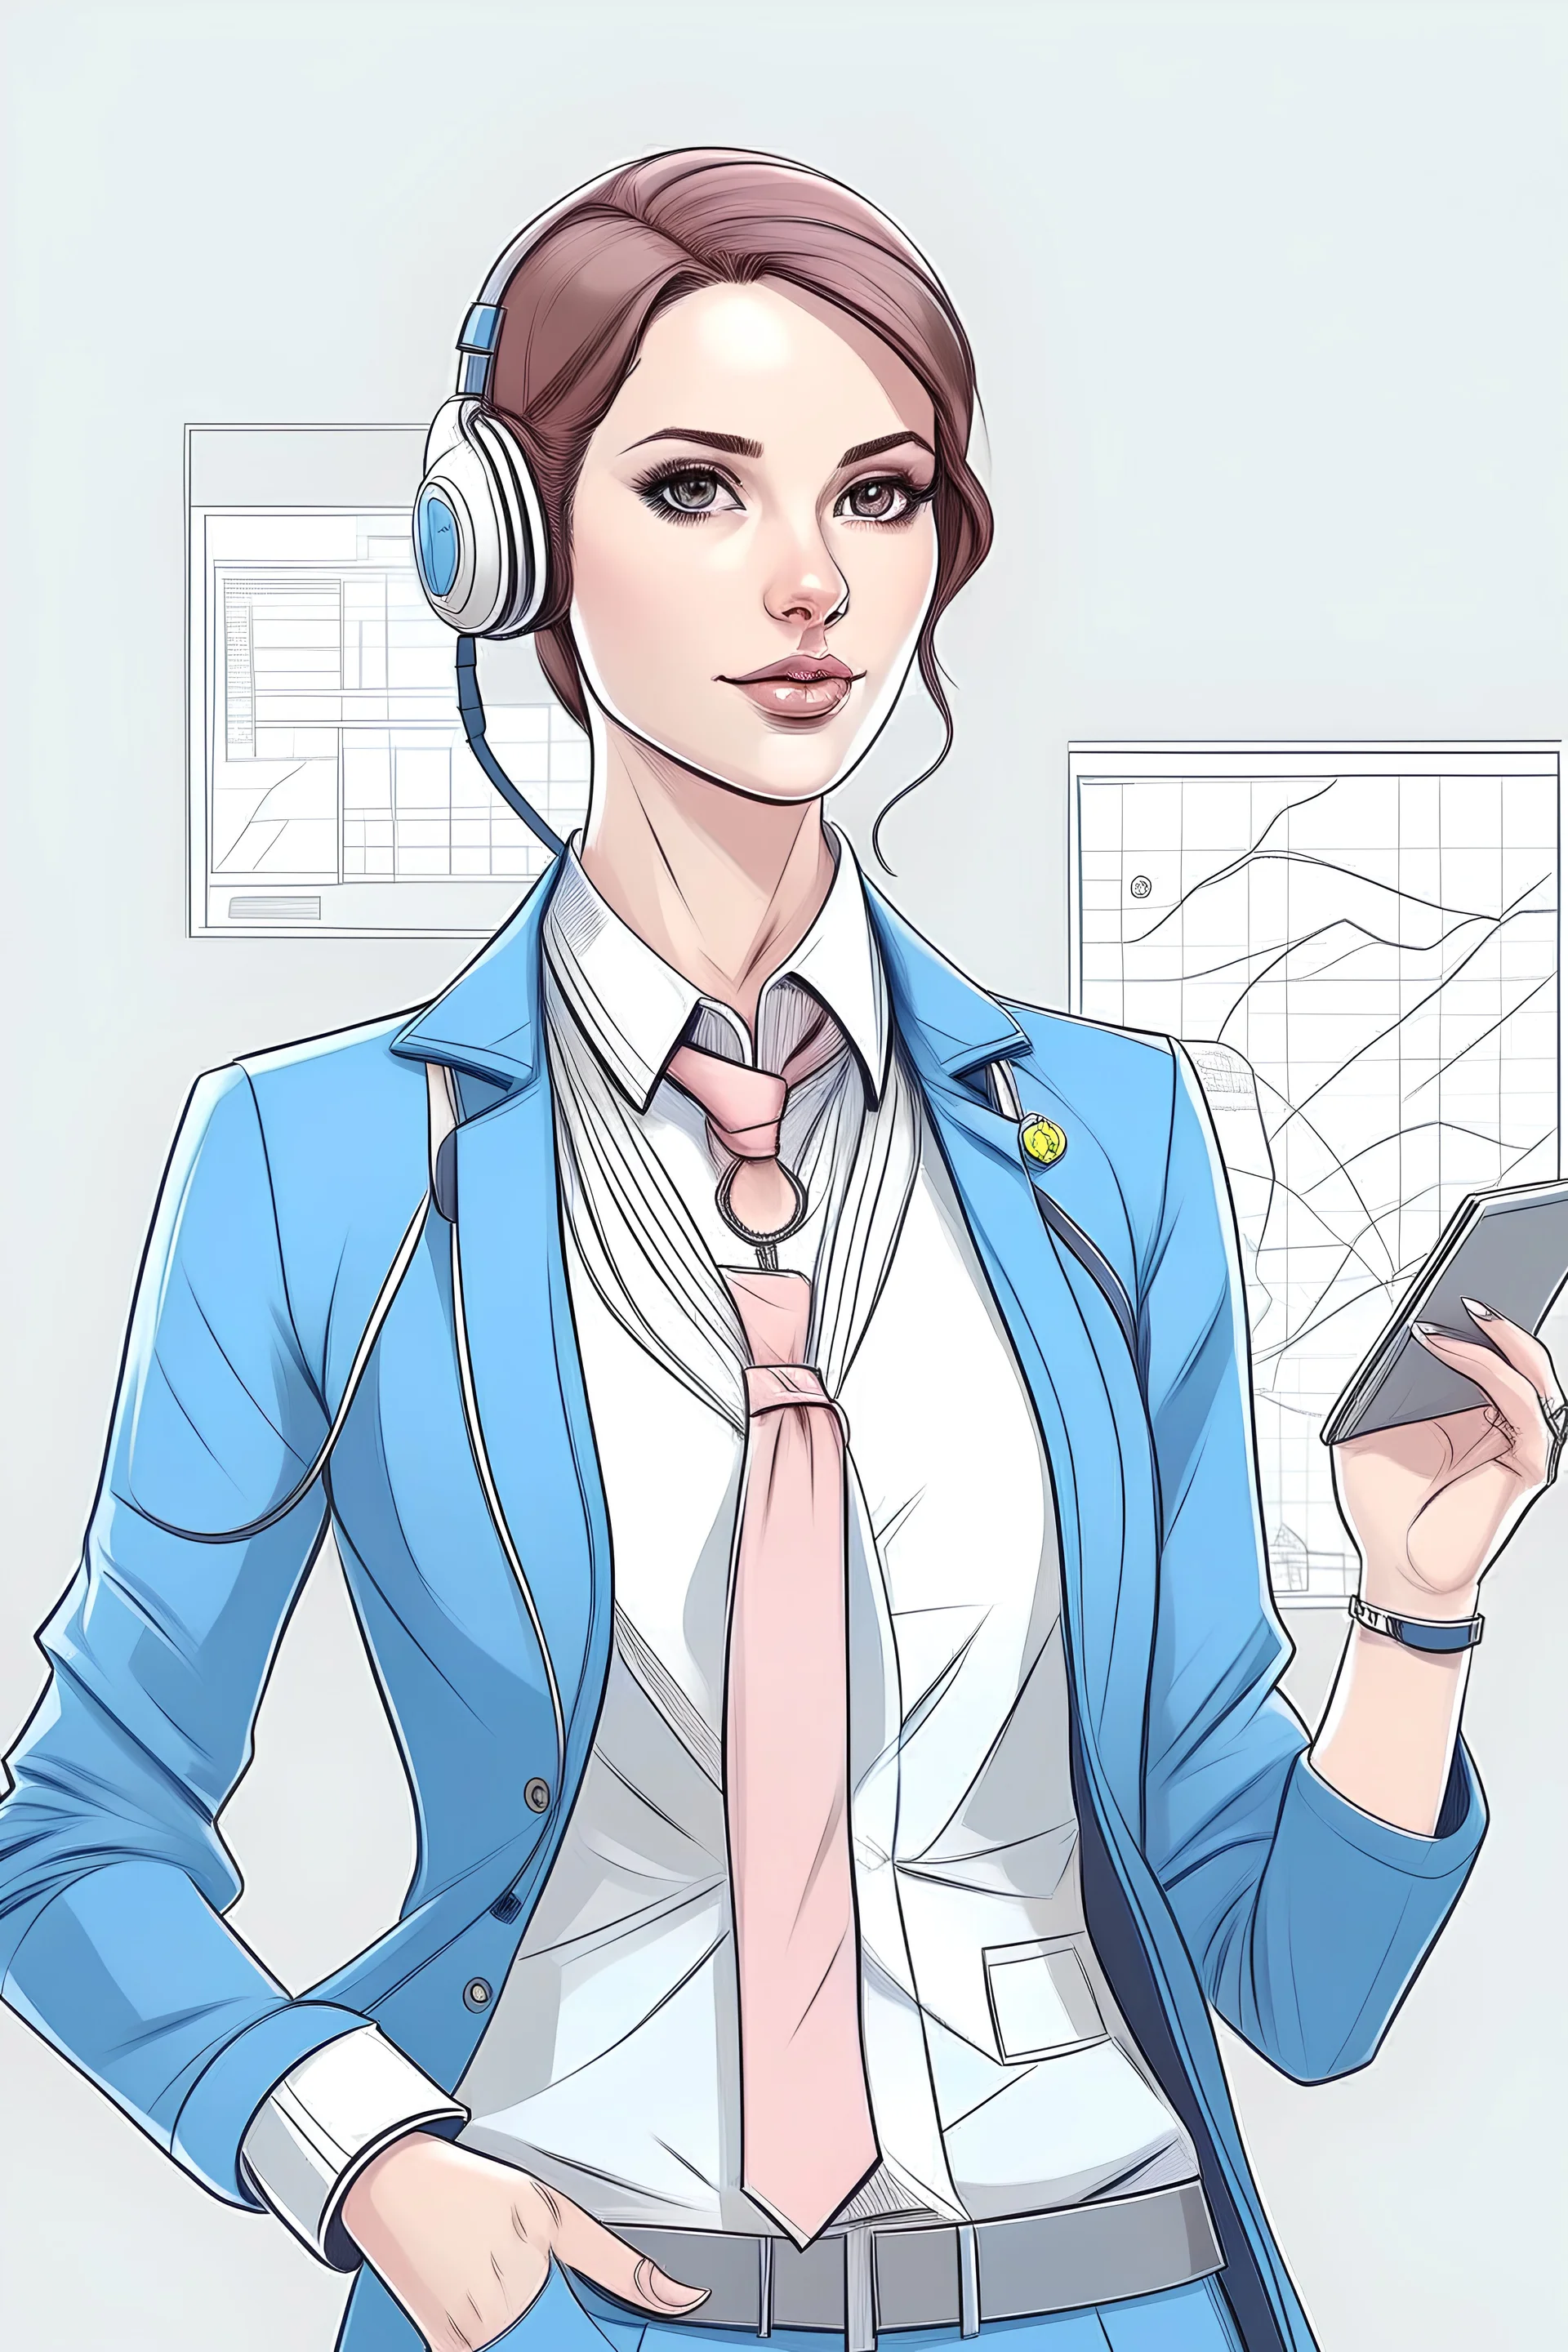 draw realistic attractive front view descent image of female engineer with Full lips with a natural pinkish hue and An engineering workspace or office setting with technical drawings, a computer,.and with Practical yet stylish shoes, blue blazer Accessories like delicate earrings, a simple necklace, and a smartwatch or bracelet.it hsould be colourful